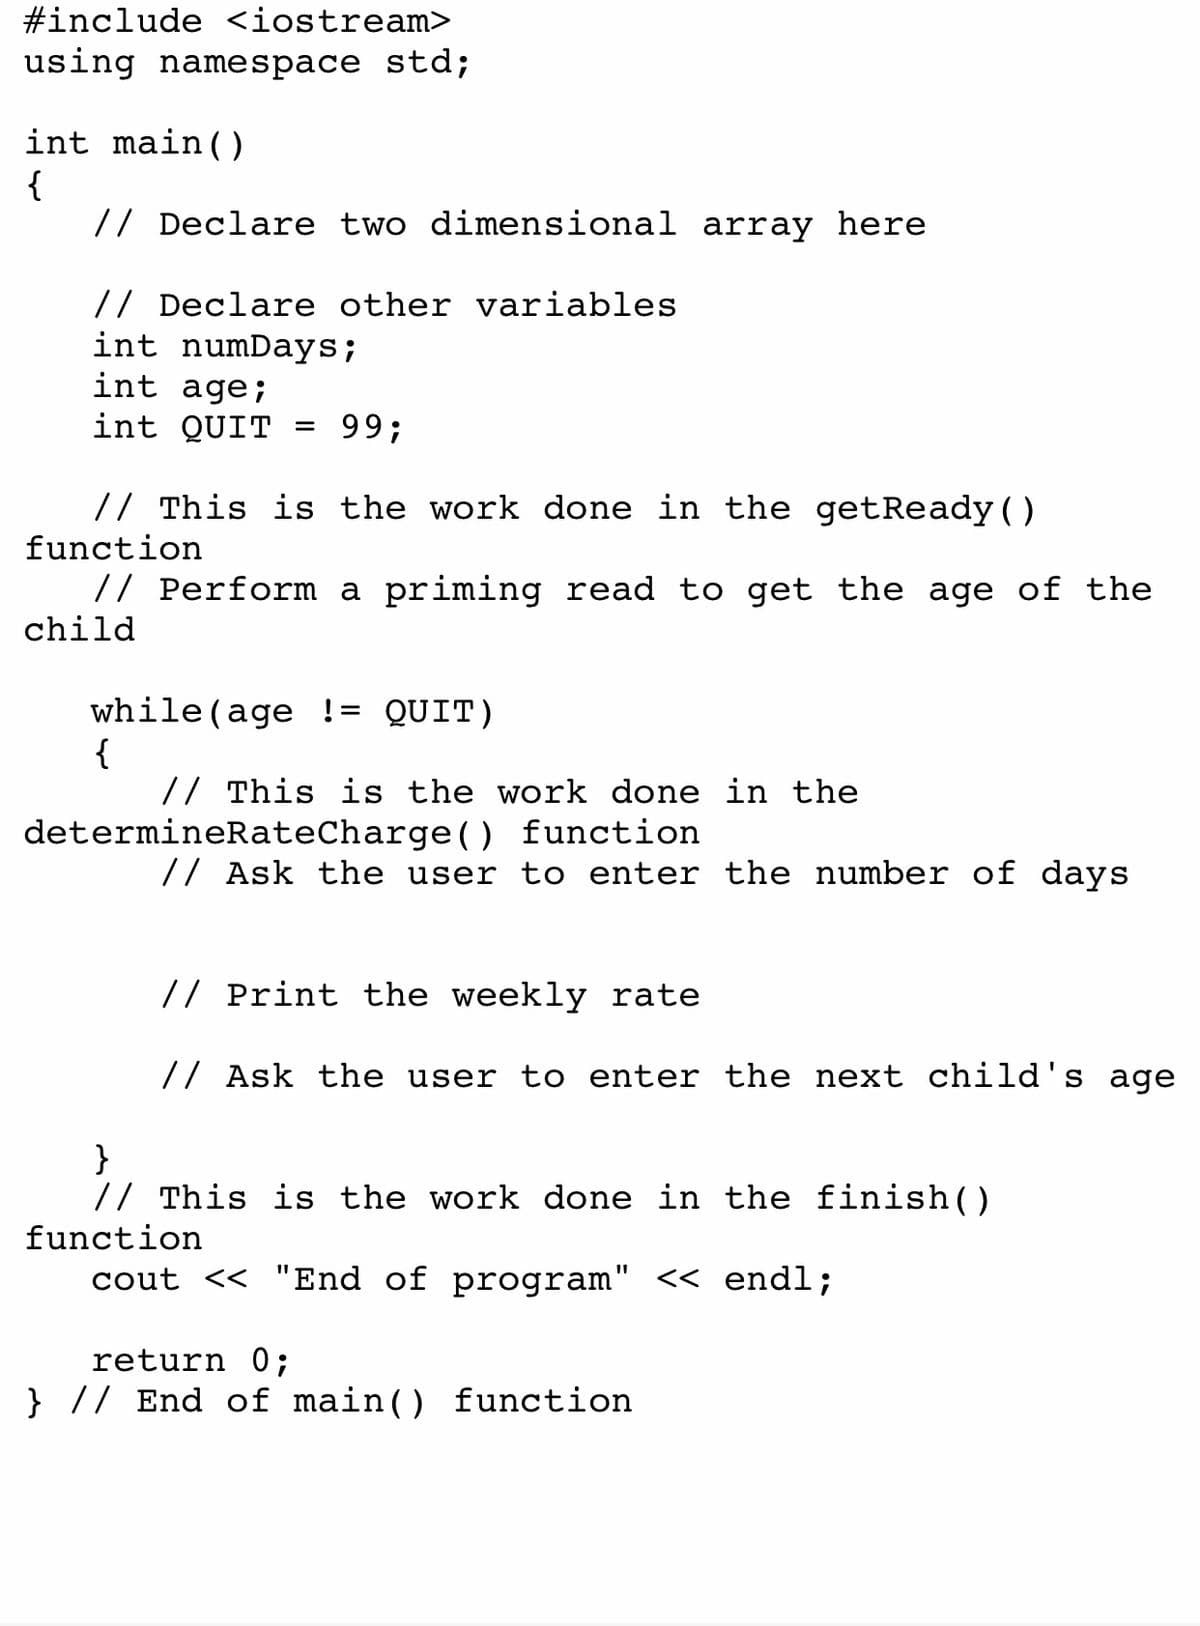 #include <iostream>
using namespace std;
int main()
{
// Declare two dimensional array here
// Declare other variables
int numDays;
int age;
int QUIT =
99;
// This is the work done in the getReady ()
function
// Perform a priming read to get the age of the
child
while (age != QUIT)
{
// This is the work done in the
determineRateCharge() function
// Ask the user to enter the number of days
// Print the weekly rate
// Ask the user to enter the next child's age
}
// This is the work done in the finish()
function
cout << "End of program" << endl;
return 0;
} // End of main() function
